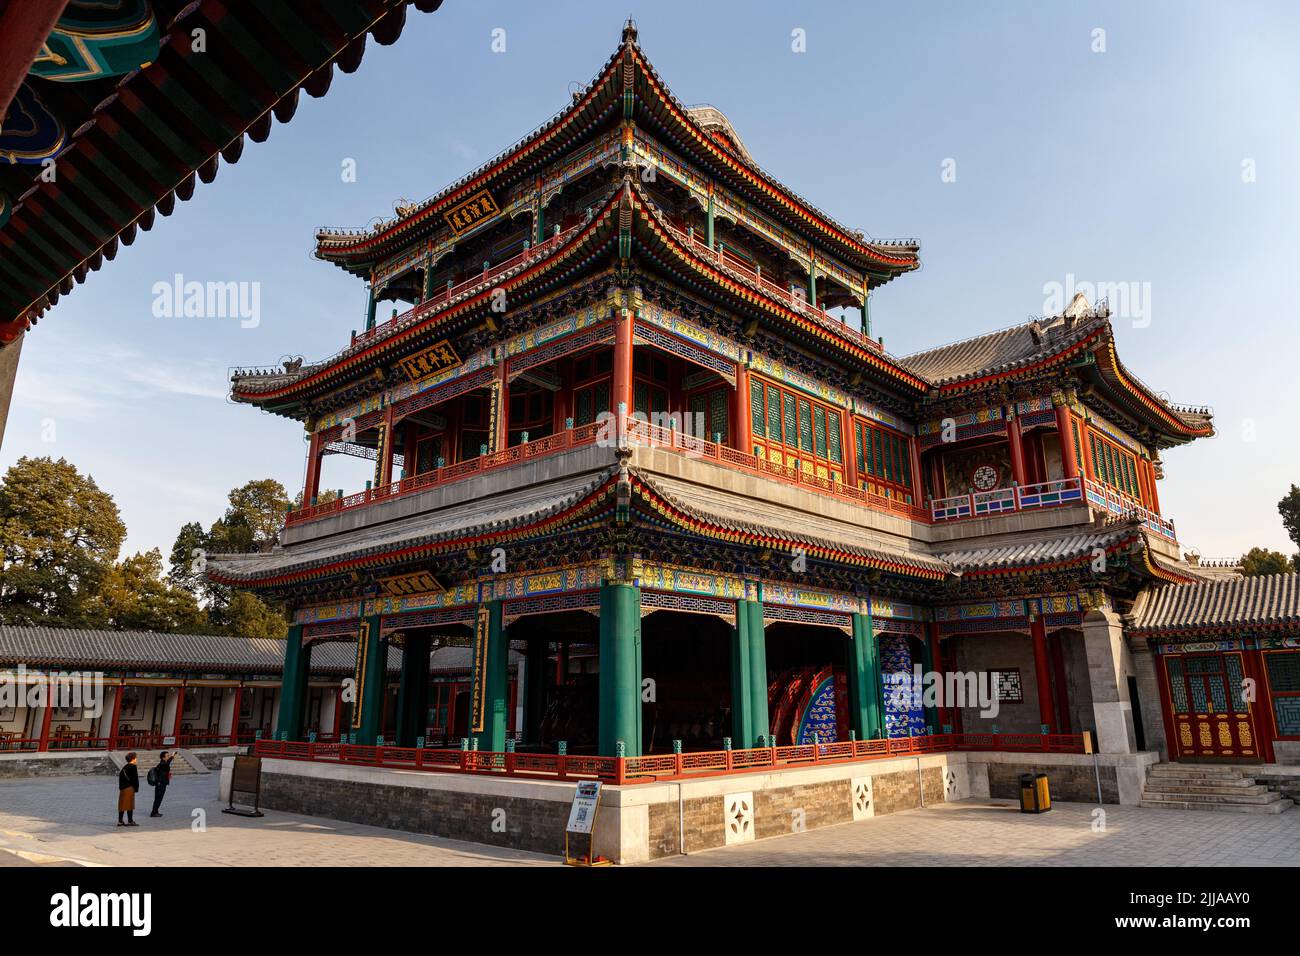 Theater stage at the Summer Palace in Beijing, China in March 2018. Stock Photo